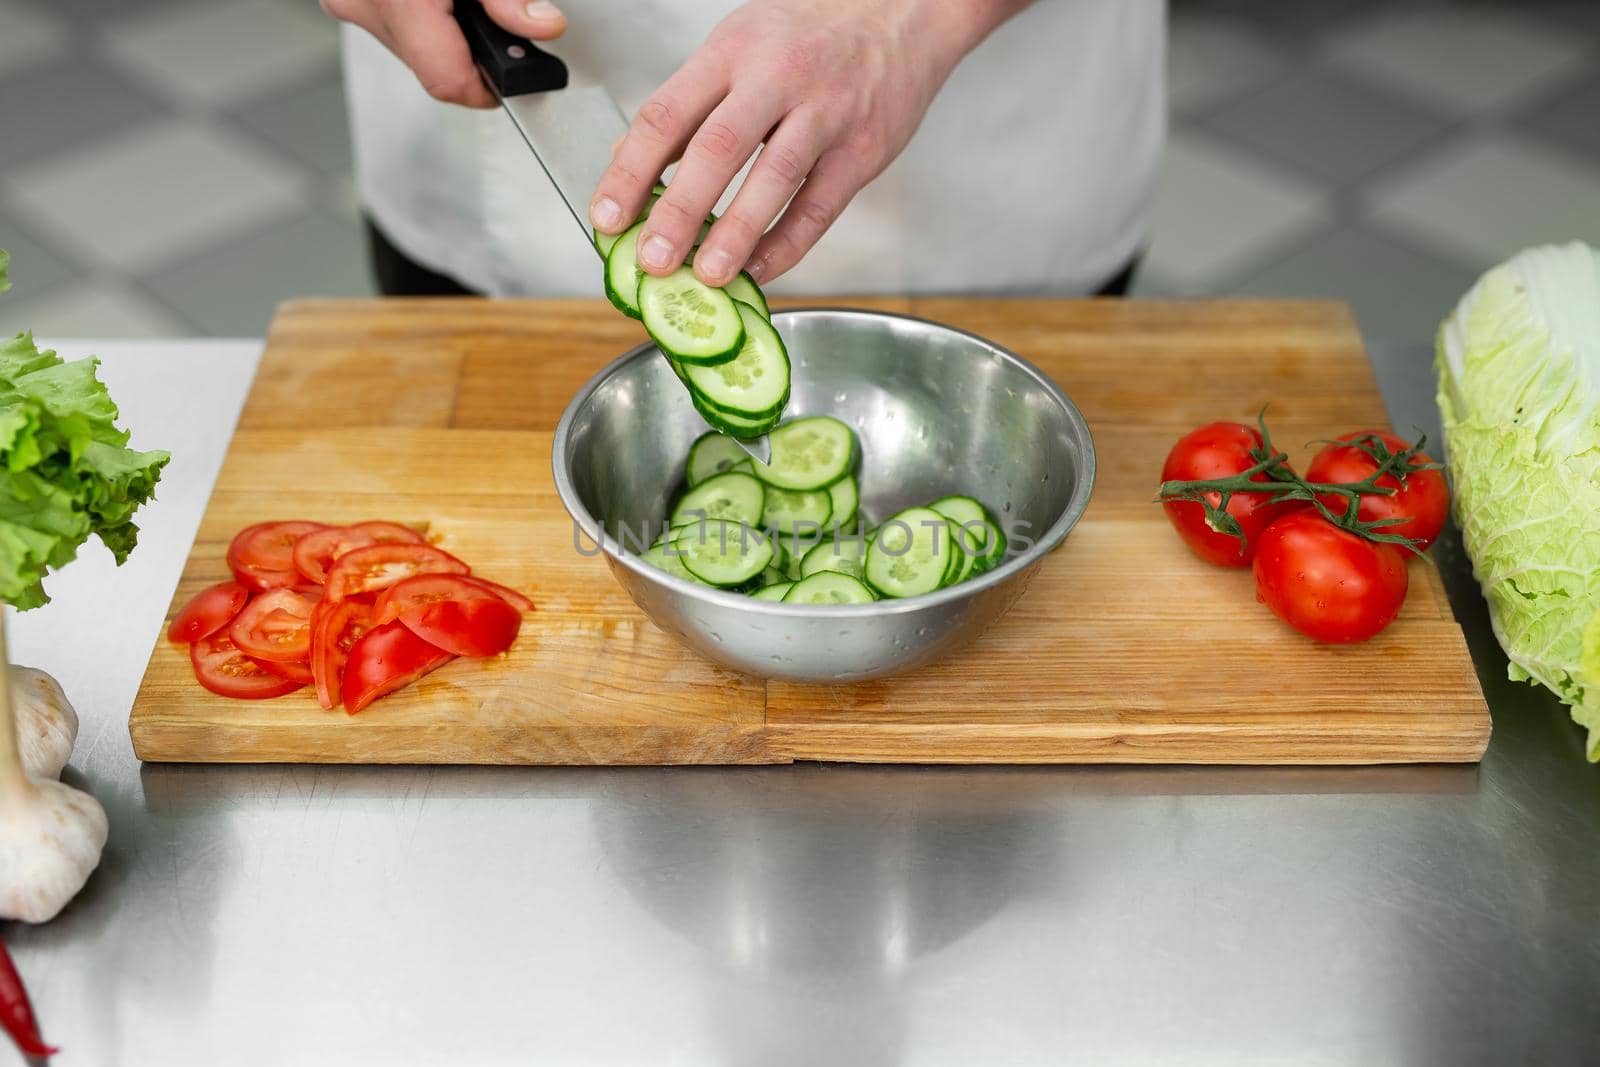 Chef in the kitchen cuts fresh and delicious vegetables for a vegetable salad